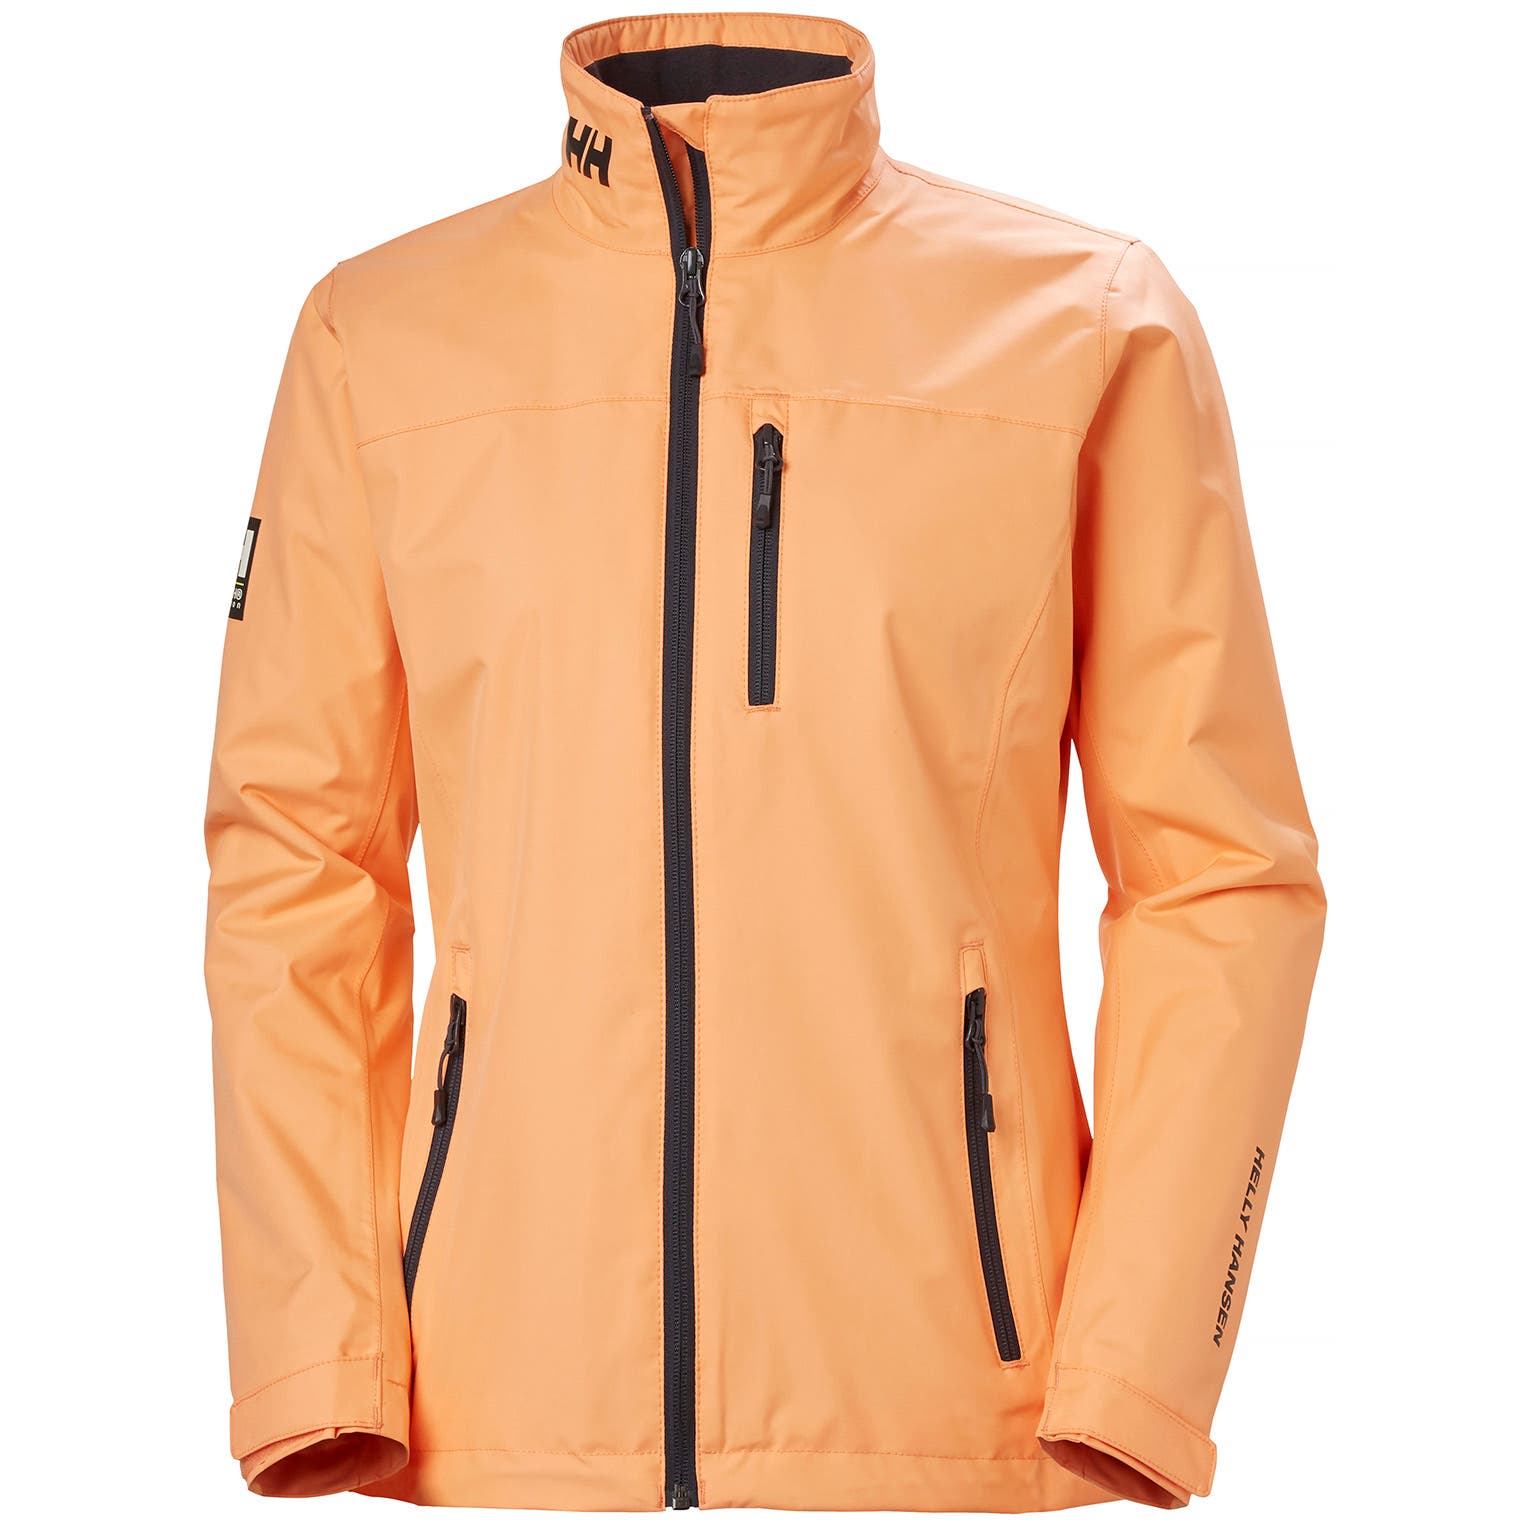 Helly Hansen Women's Crew Midlayer Jacket in Melon from the front